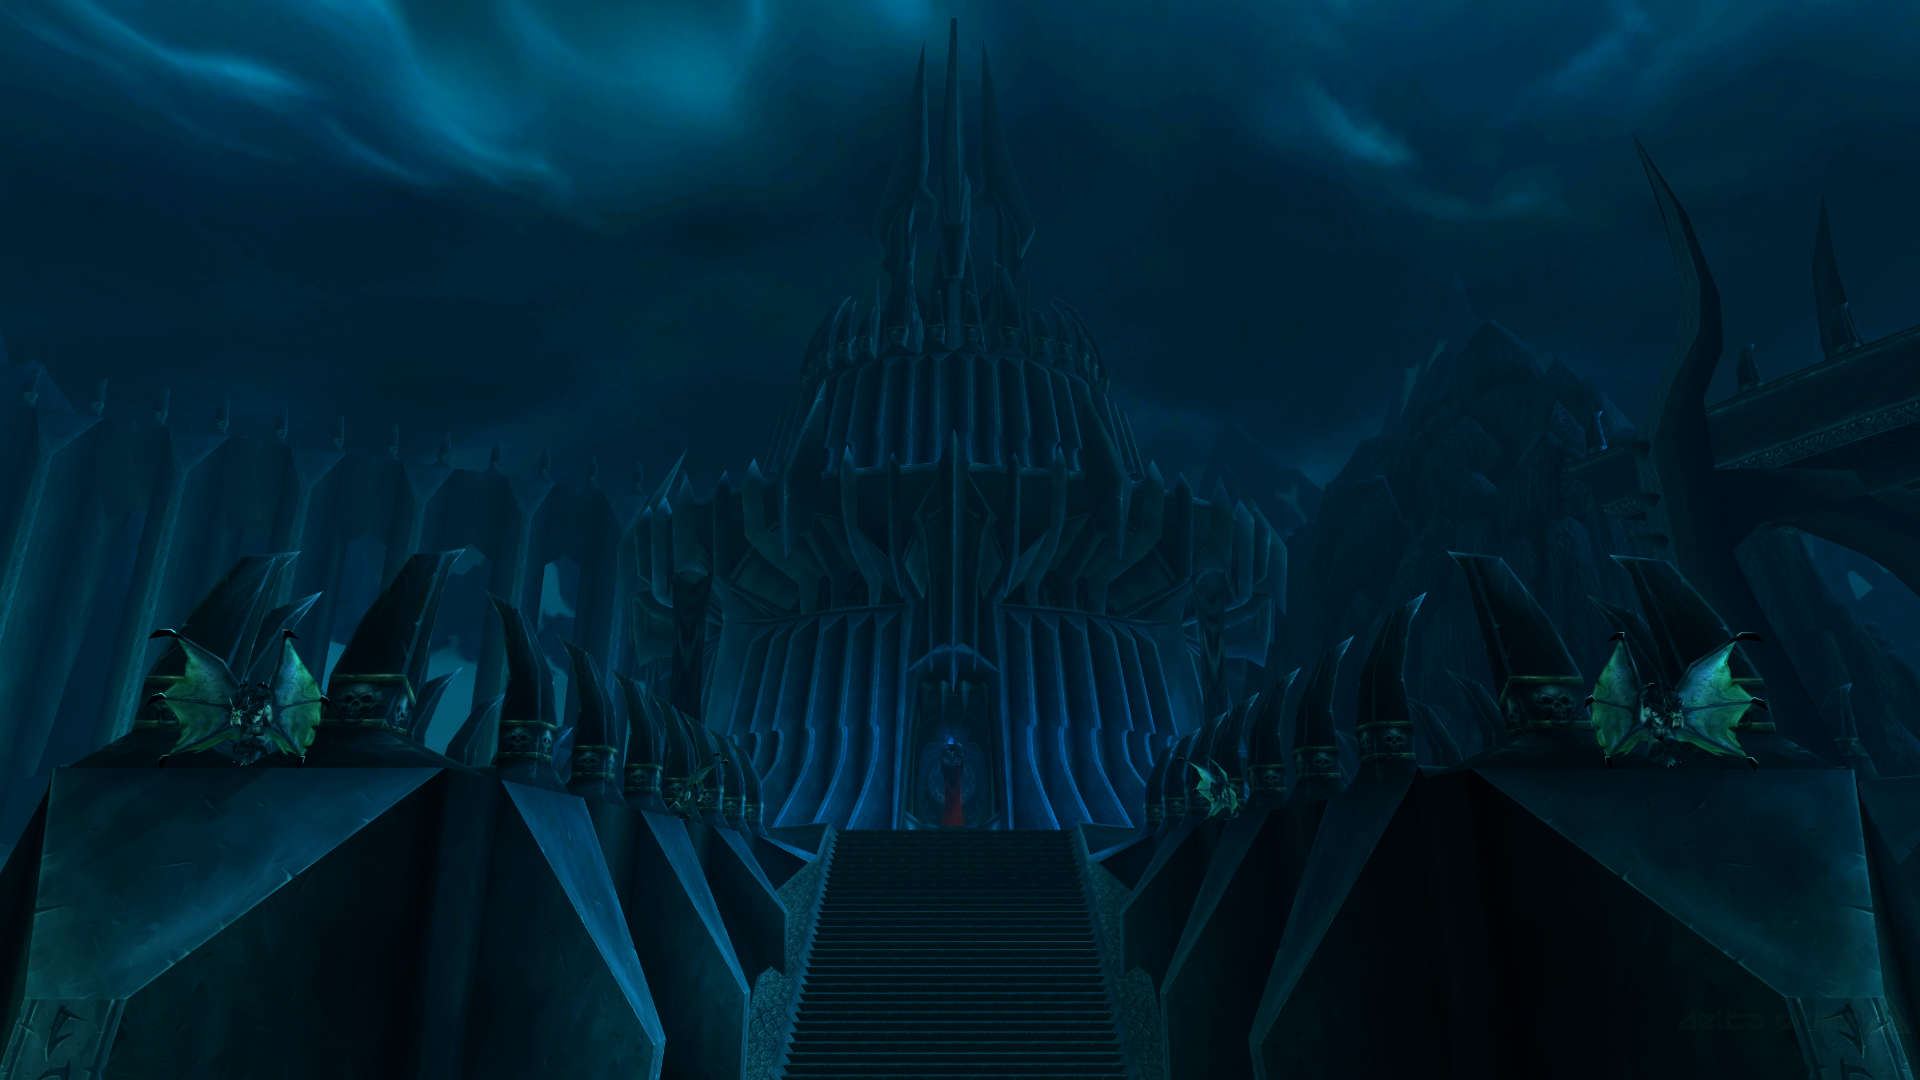 World Of Warcraft Wrath Of The Lich King Icecrown Citadel Screen Shot PC Gaming 1920x1080